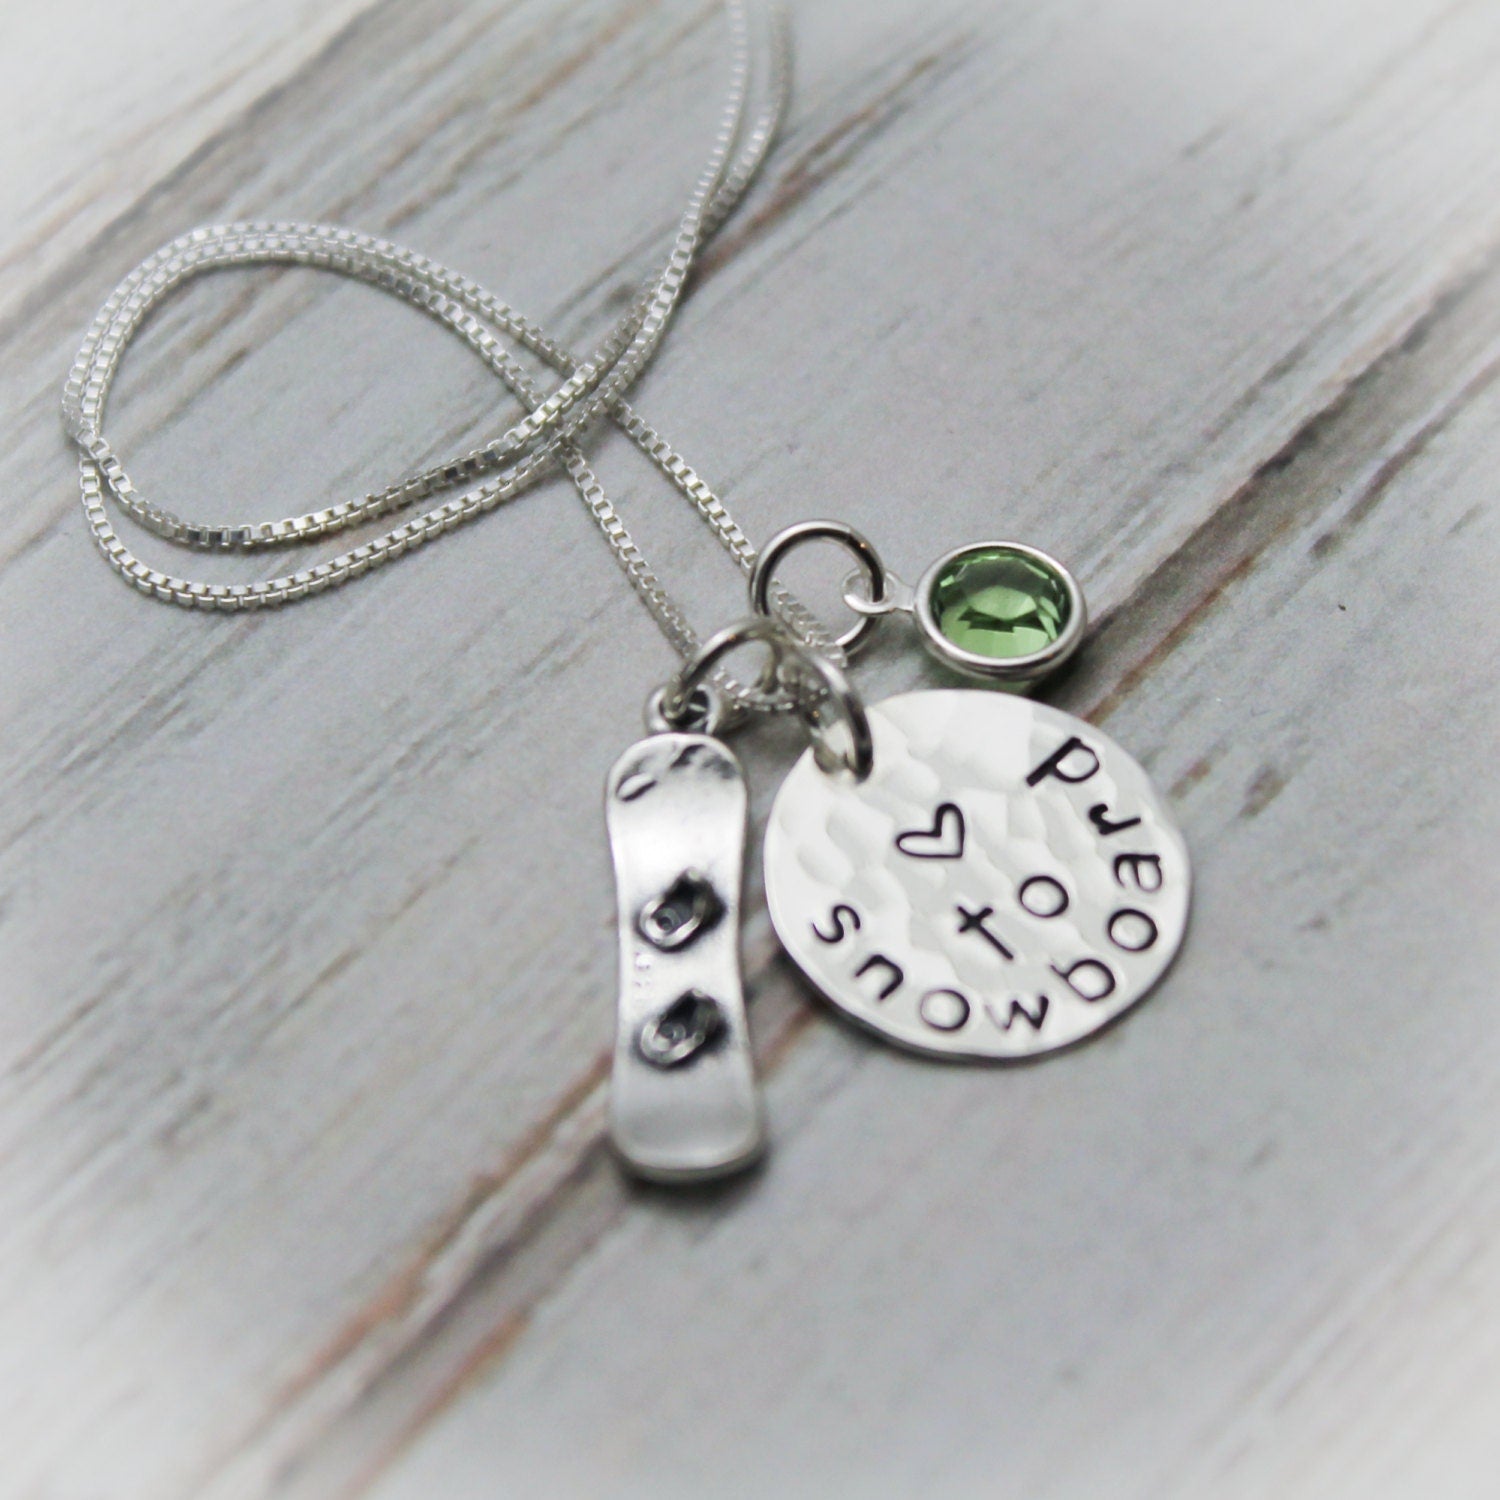 SnowBoarding Sterling Silver Personalized Hand Stamped Necklace SnowBoarder